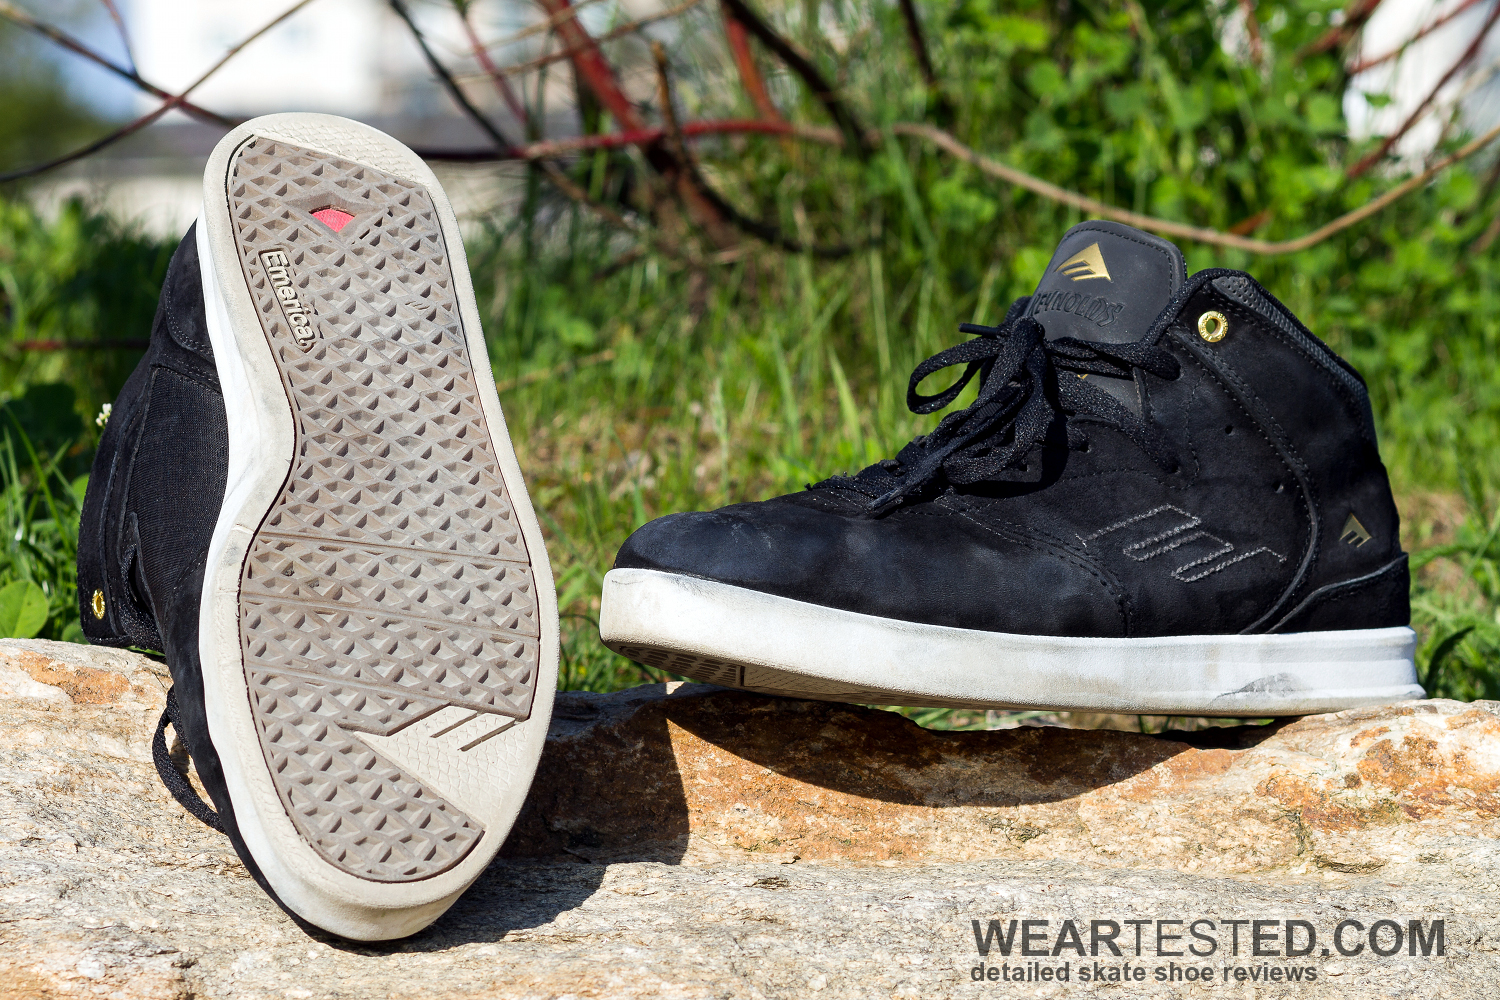 Guest-review: the Emerica Reynolds 